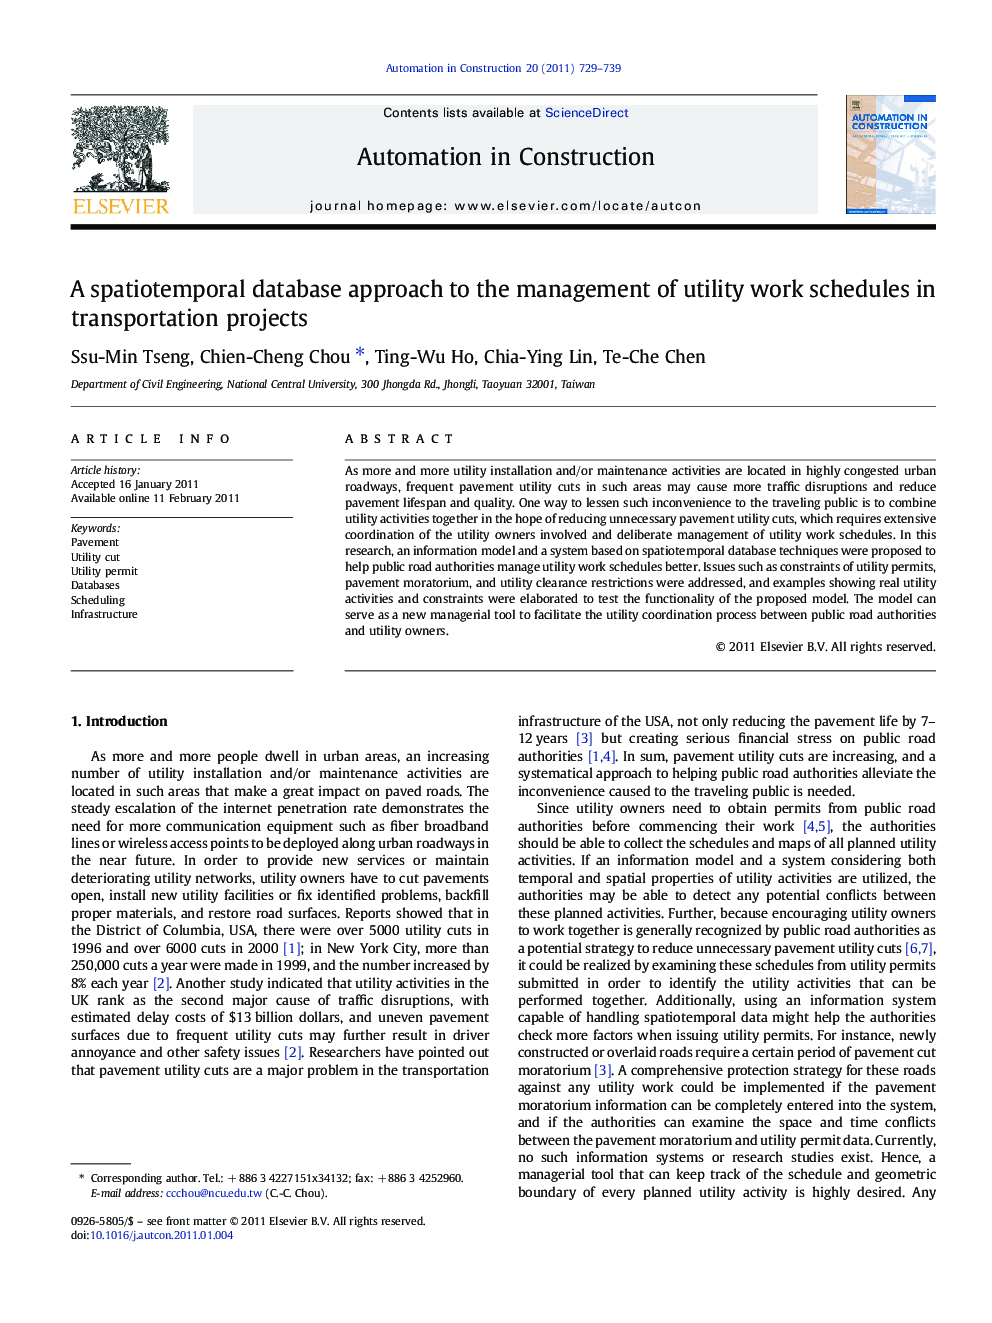 A spatiotemporal database approach to the management of utility work schedules in transportation projects